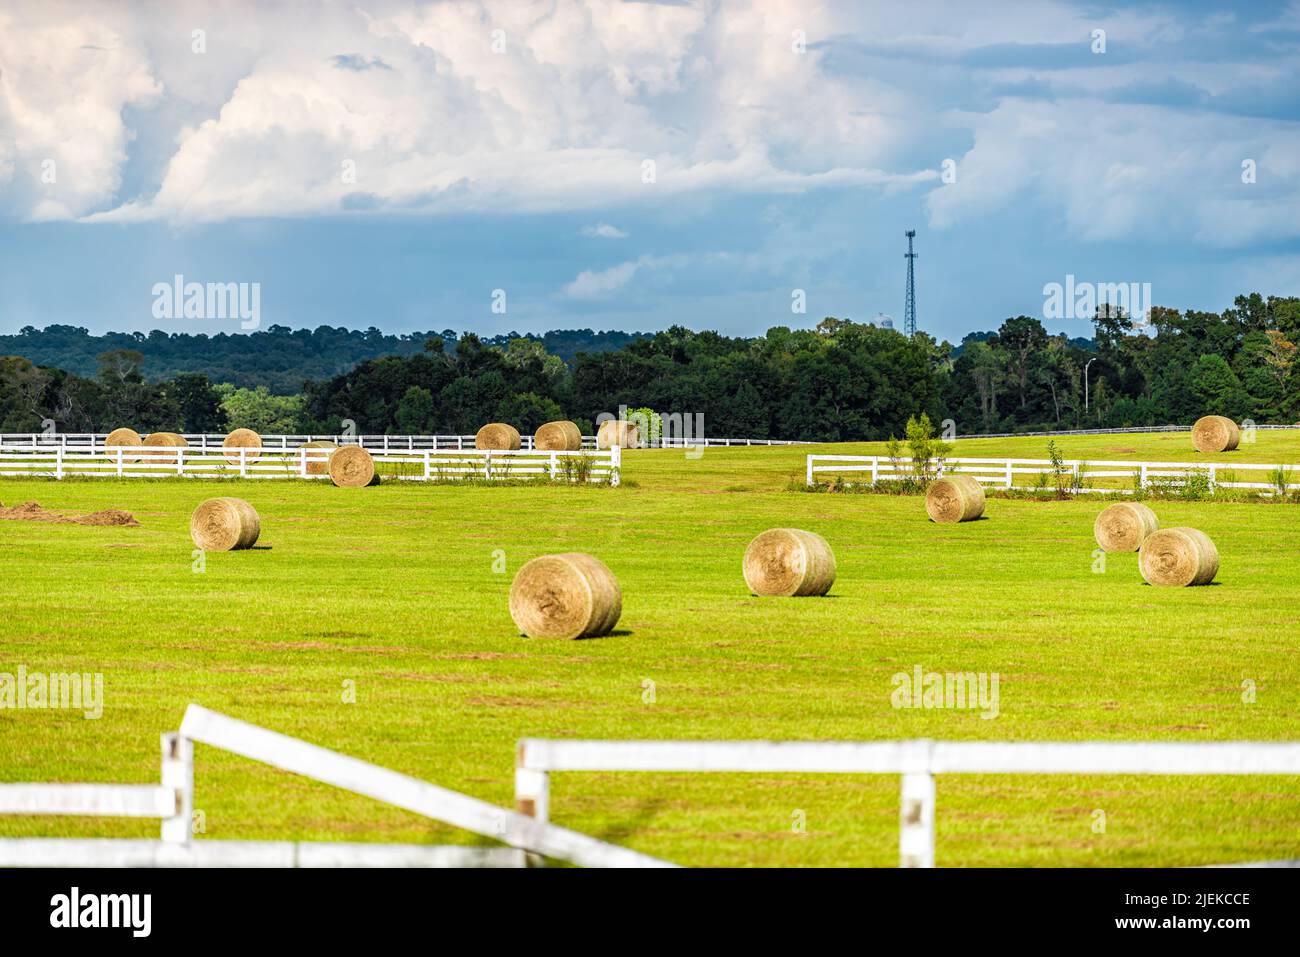 Hay roll bales on countryside field farm in Alachua in Florida, USA rural area with farmland meadow white picket fence background and stormy sunset sk Stock Photo